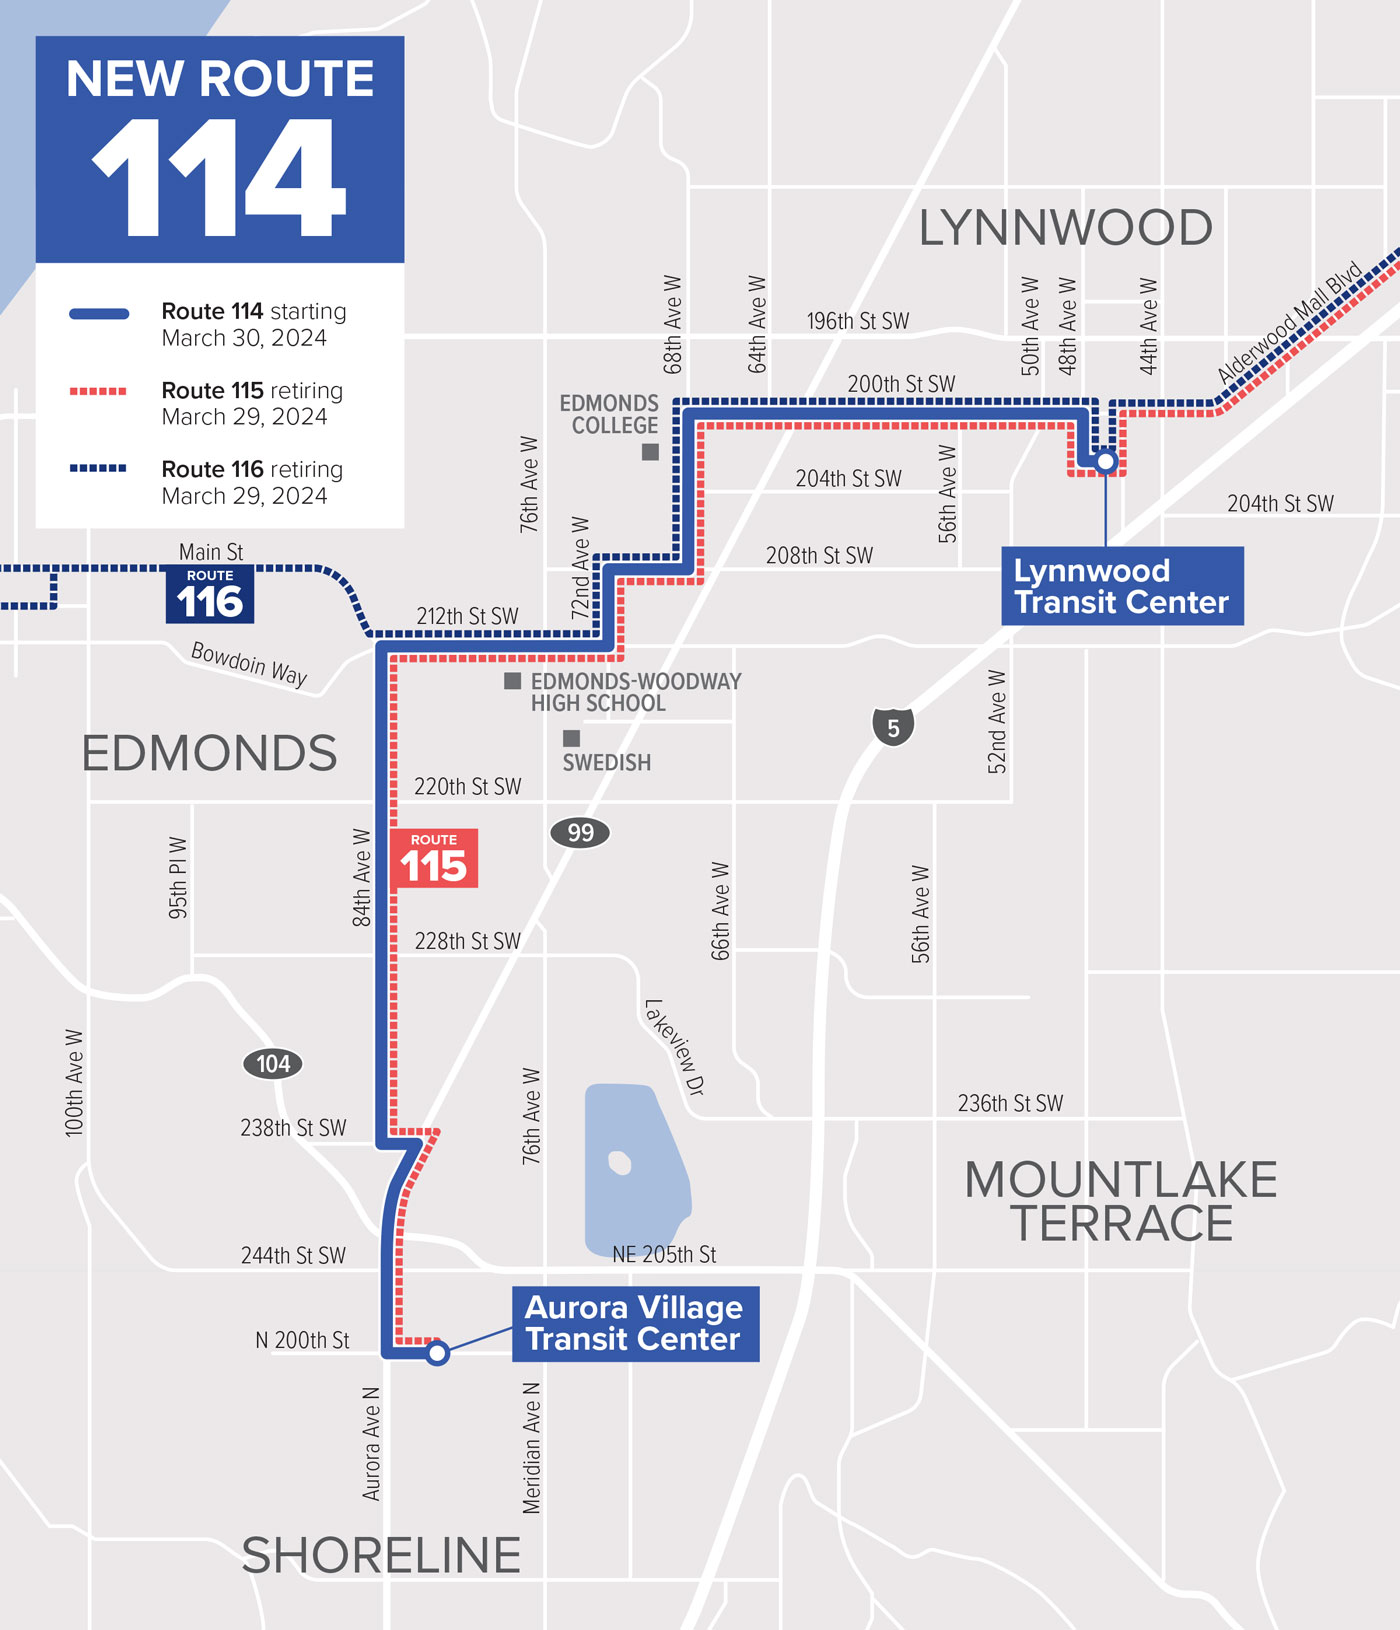 Map of Route 114 connecting Aurora Village Transit Center, Edmonds-Woodway High School, Edmonds College, 200th St, and Lynnwood Transit Center. Highlights connections to Swift Blue and Orange lines, and serves as an alternative for riders of Routes 115, 116, or 120. Displays 30-minute service intervals during weekday peak travel times for efficient transit options.